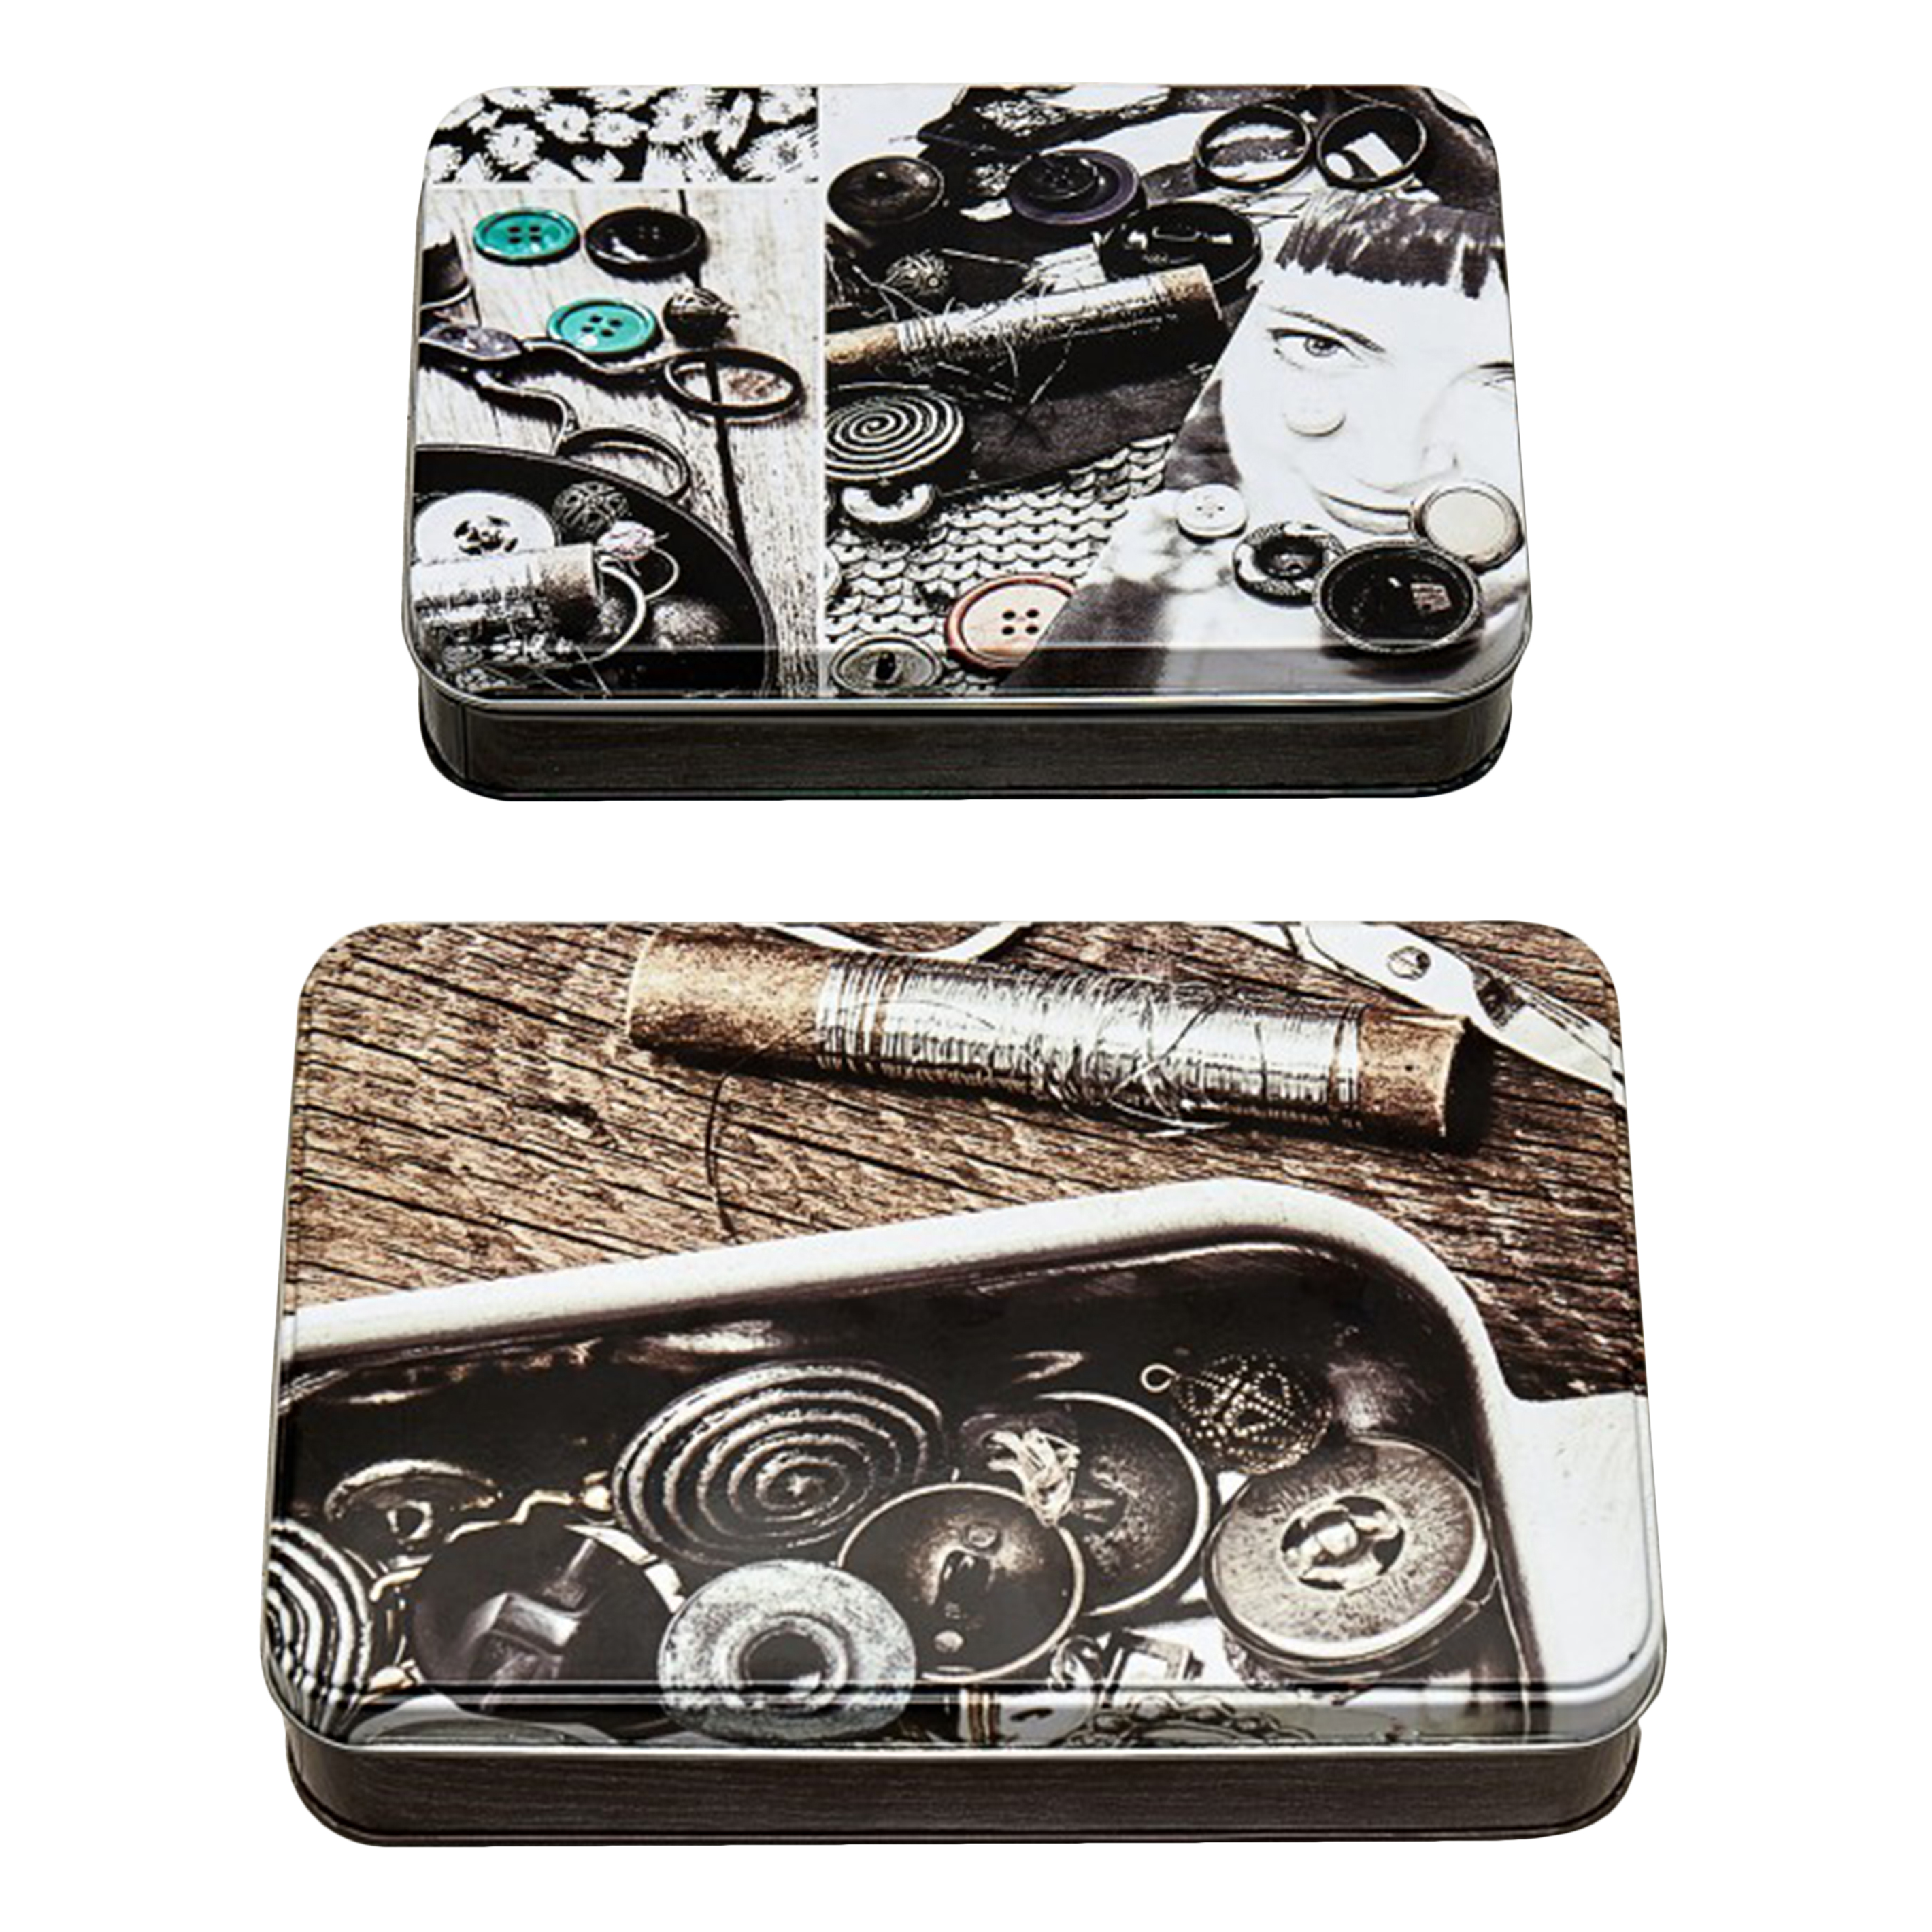 Picture of Sewing Themed Tins: Set of 2: Monochrome